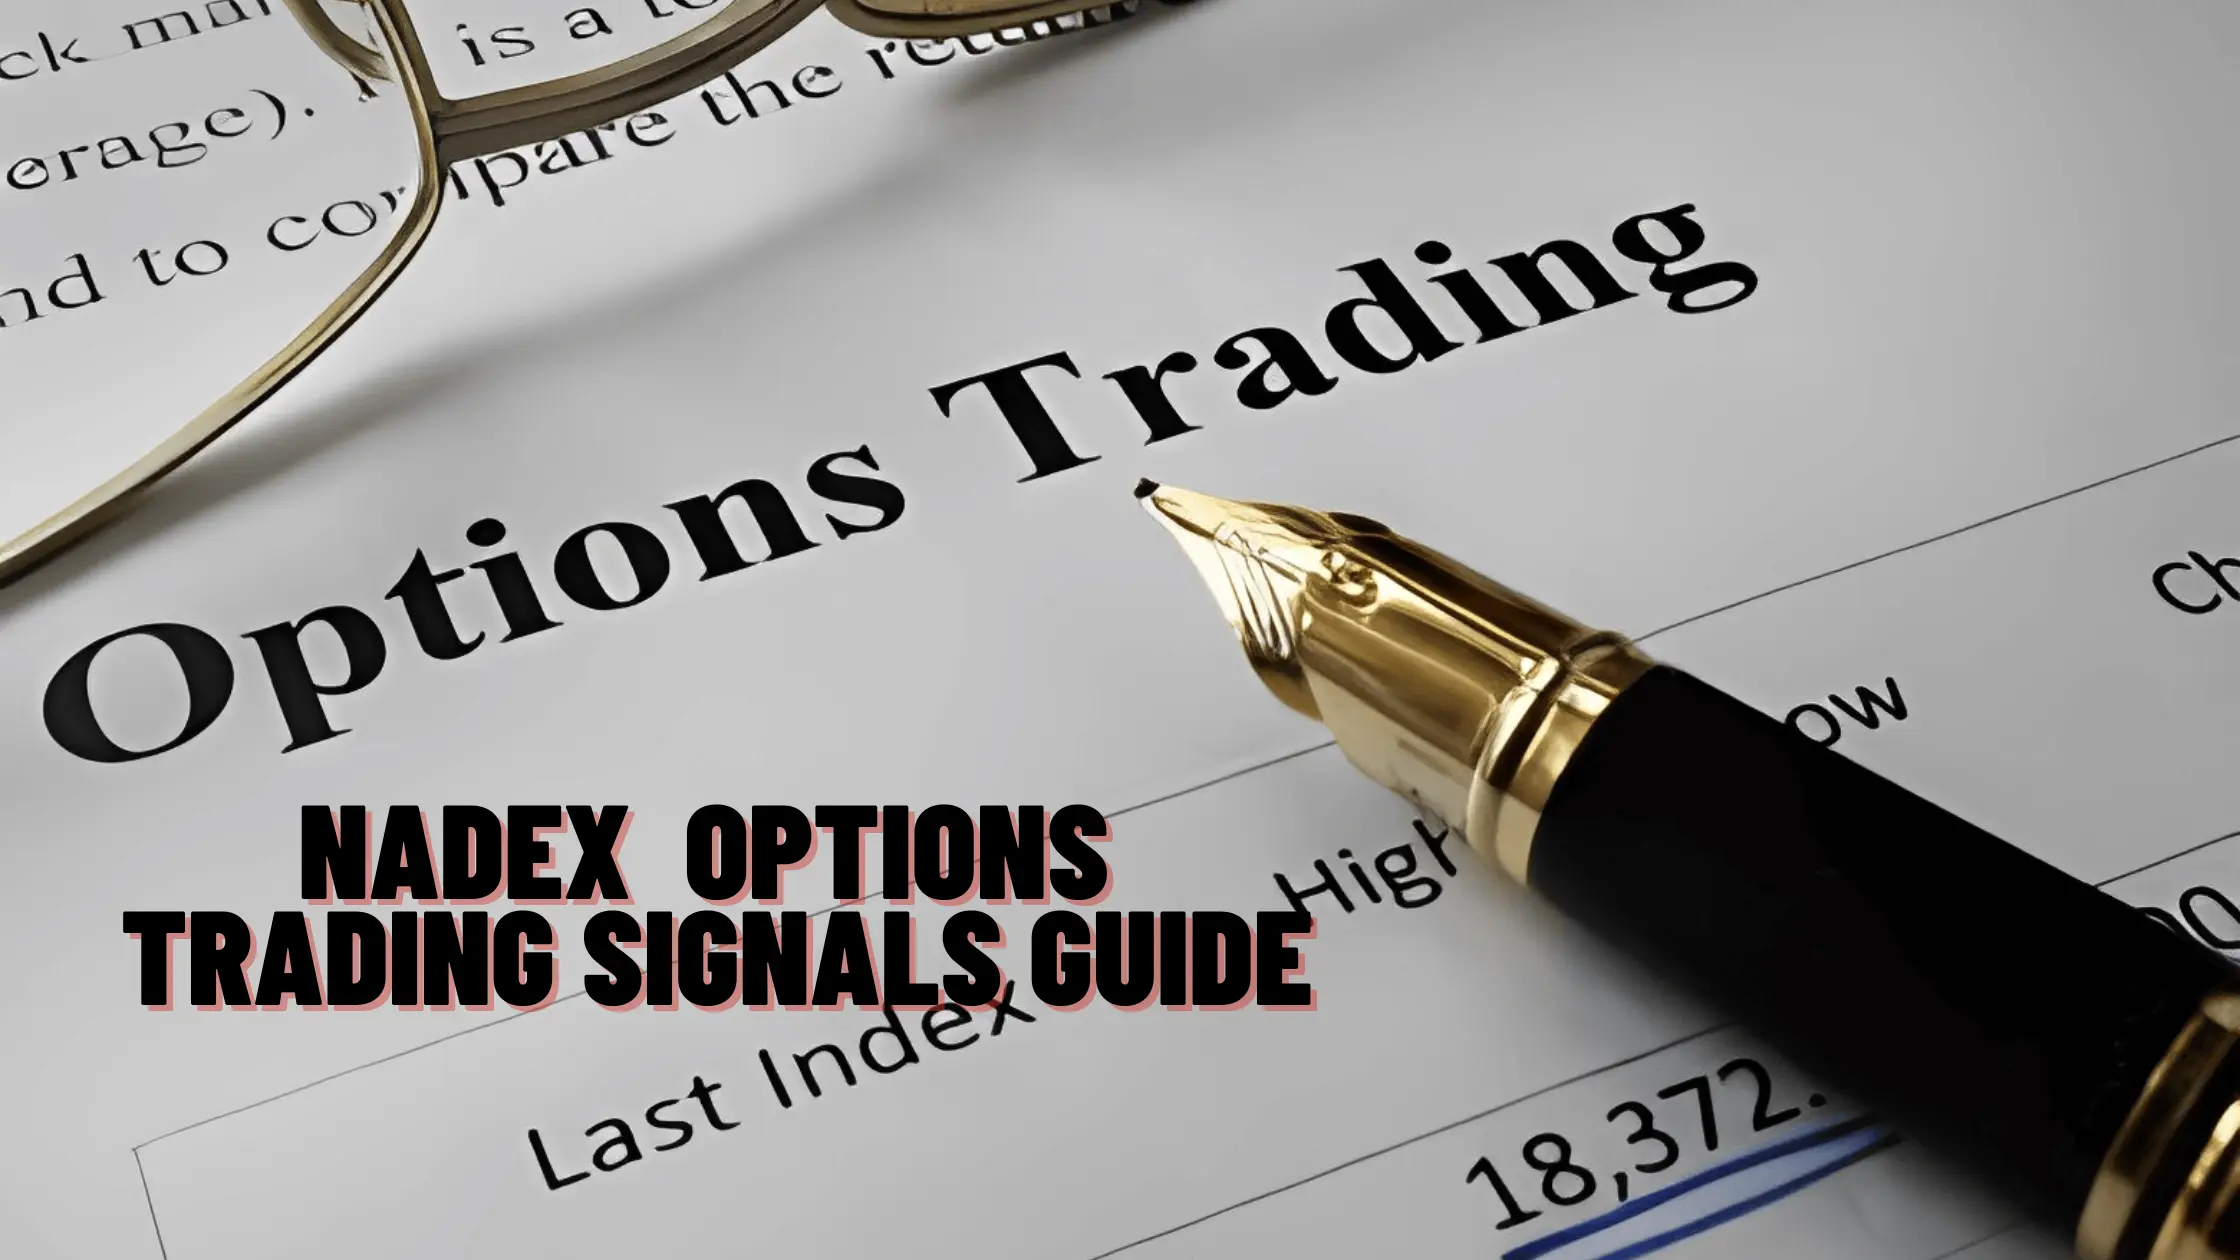 Nadex trading Signal Guide